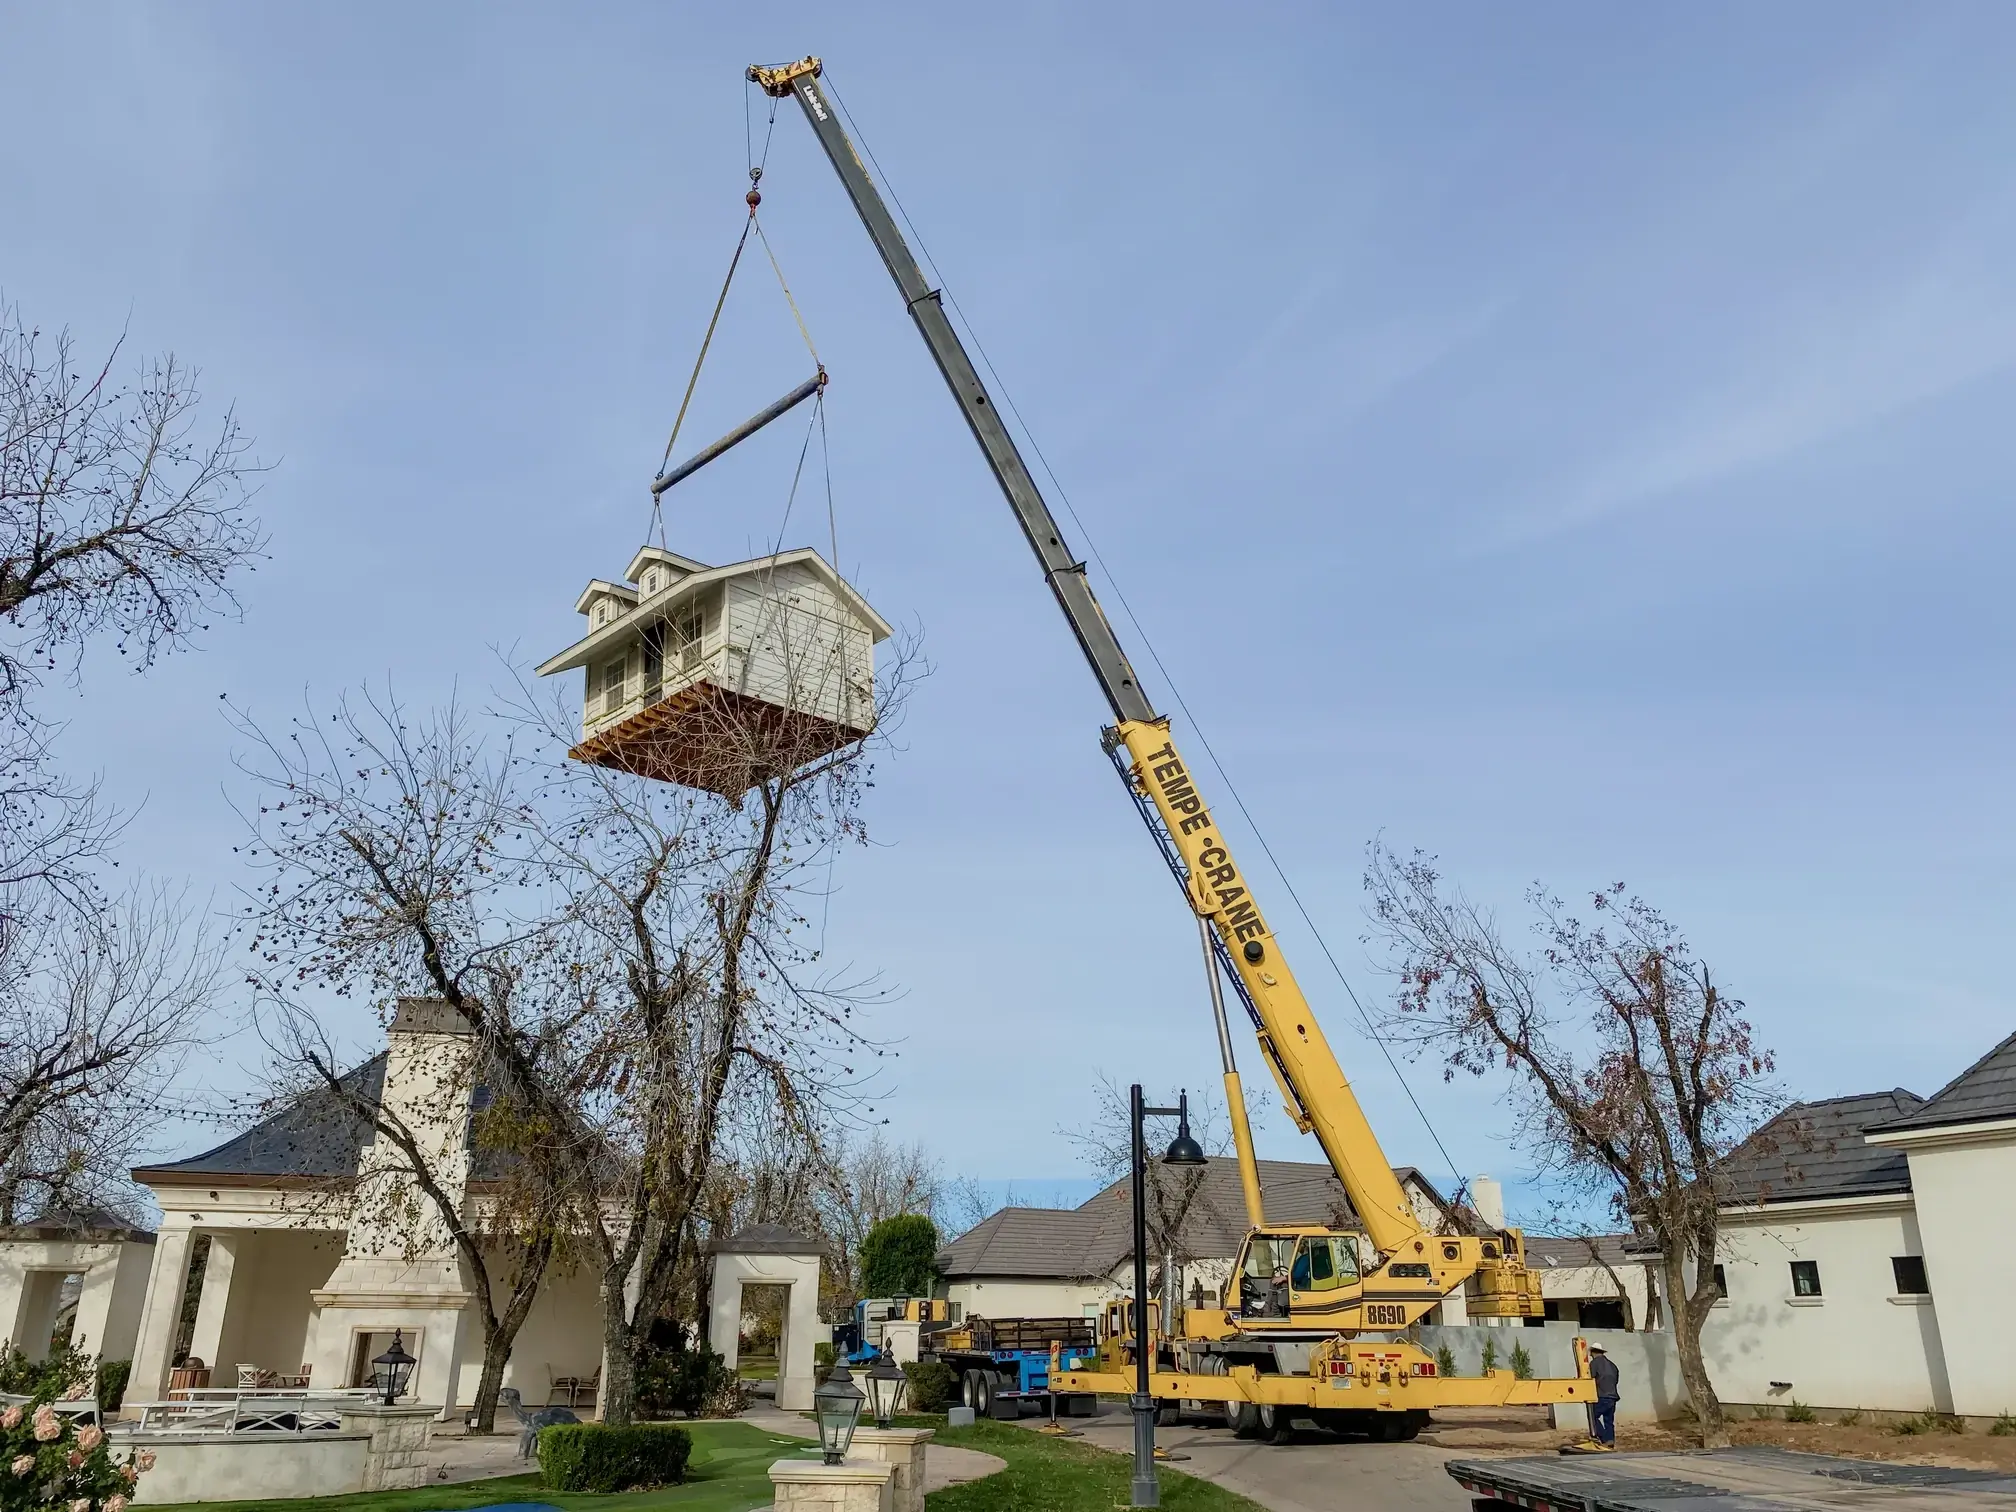 A crane hoists a large shed over a home and into its new position, illustrating our specialized lifting capabilities.